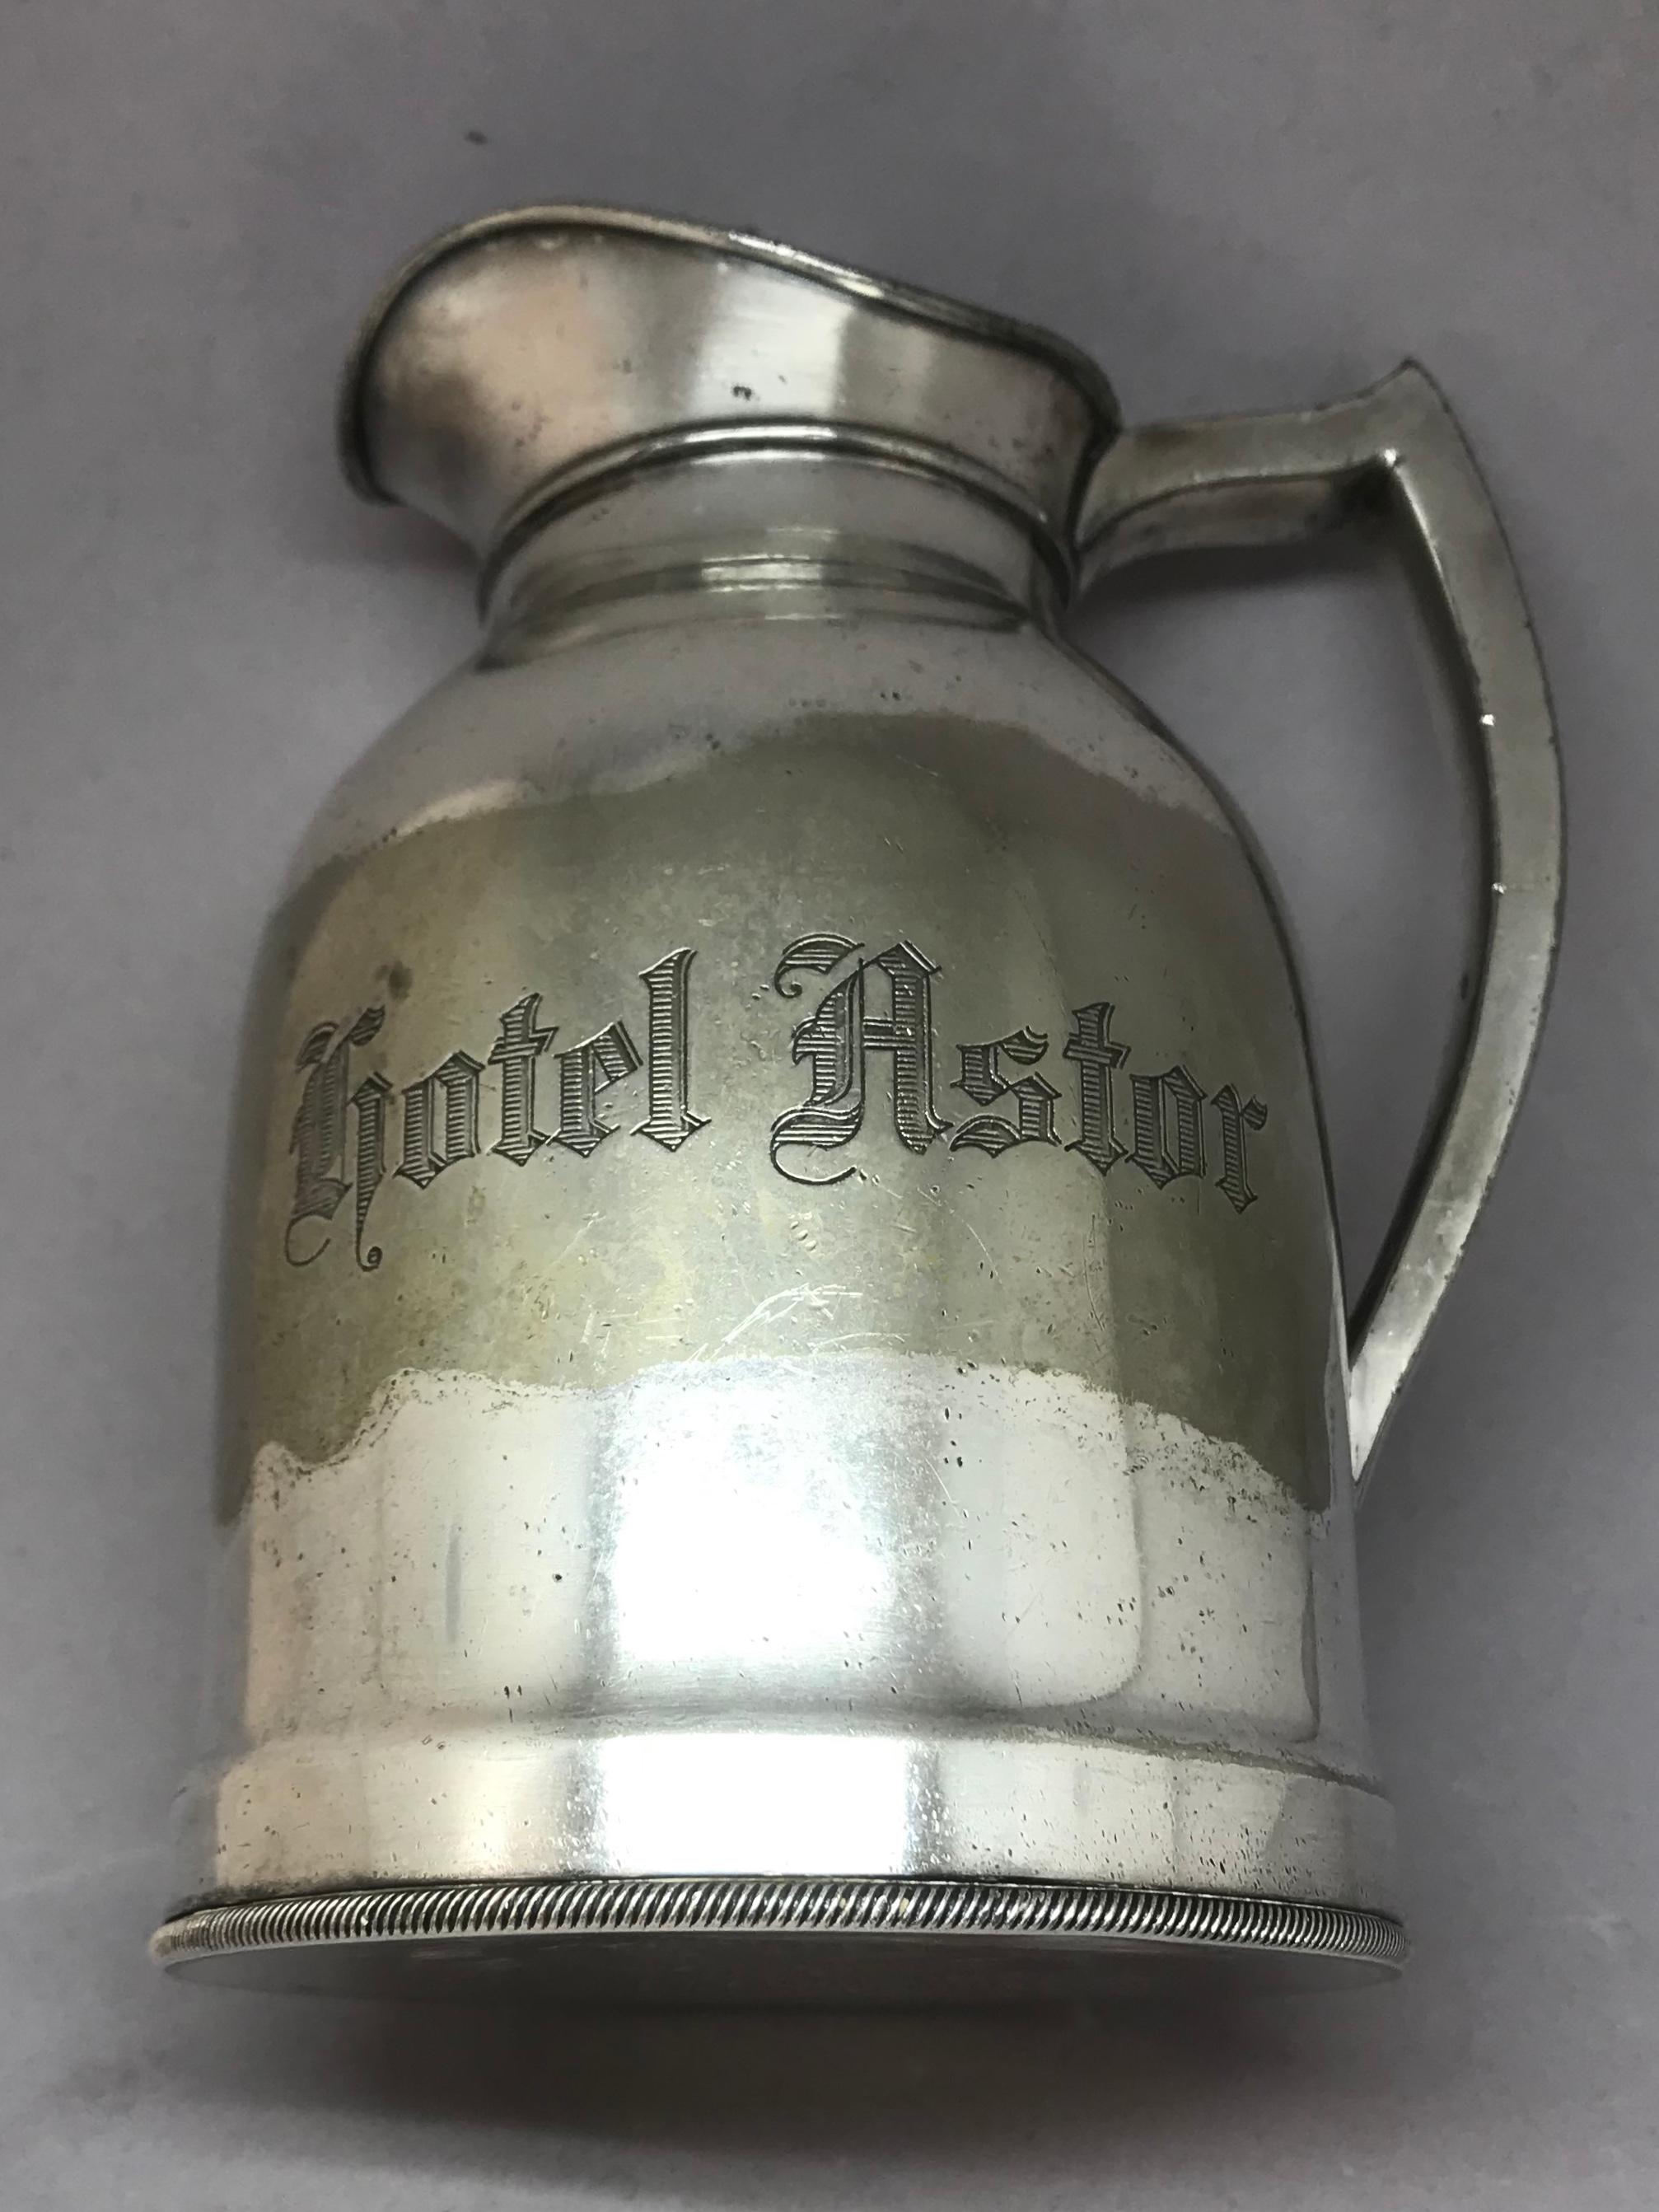 Assembled set of hotel silver serving pieces. Group of plated silver pieces from various New York hotels including an insulated carafe from the Hotel Astor, four candy dishes from the Hotel Dorset, a double handled individual sauce boat from the